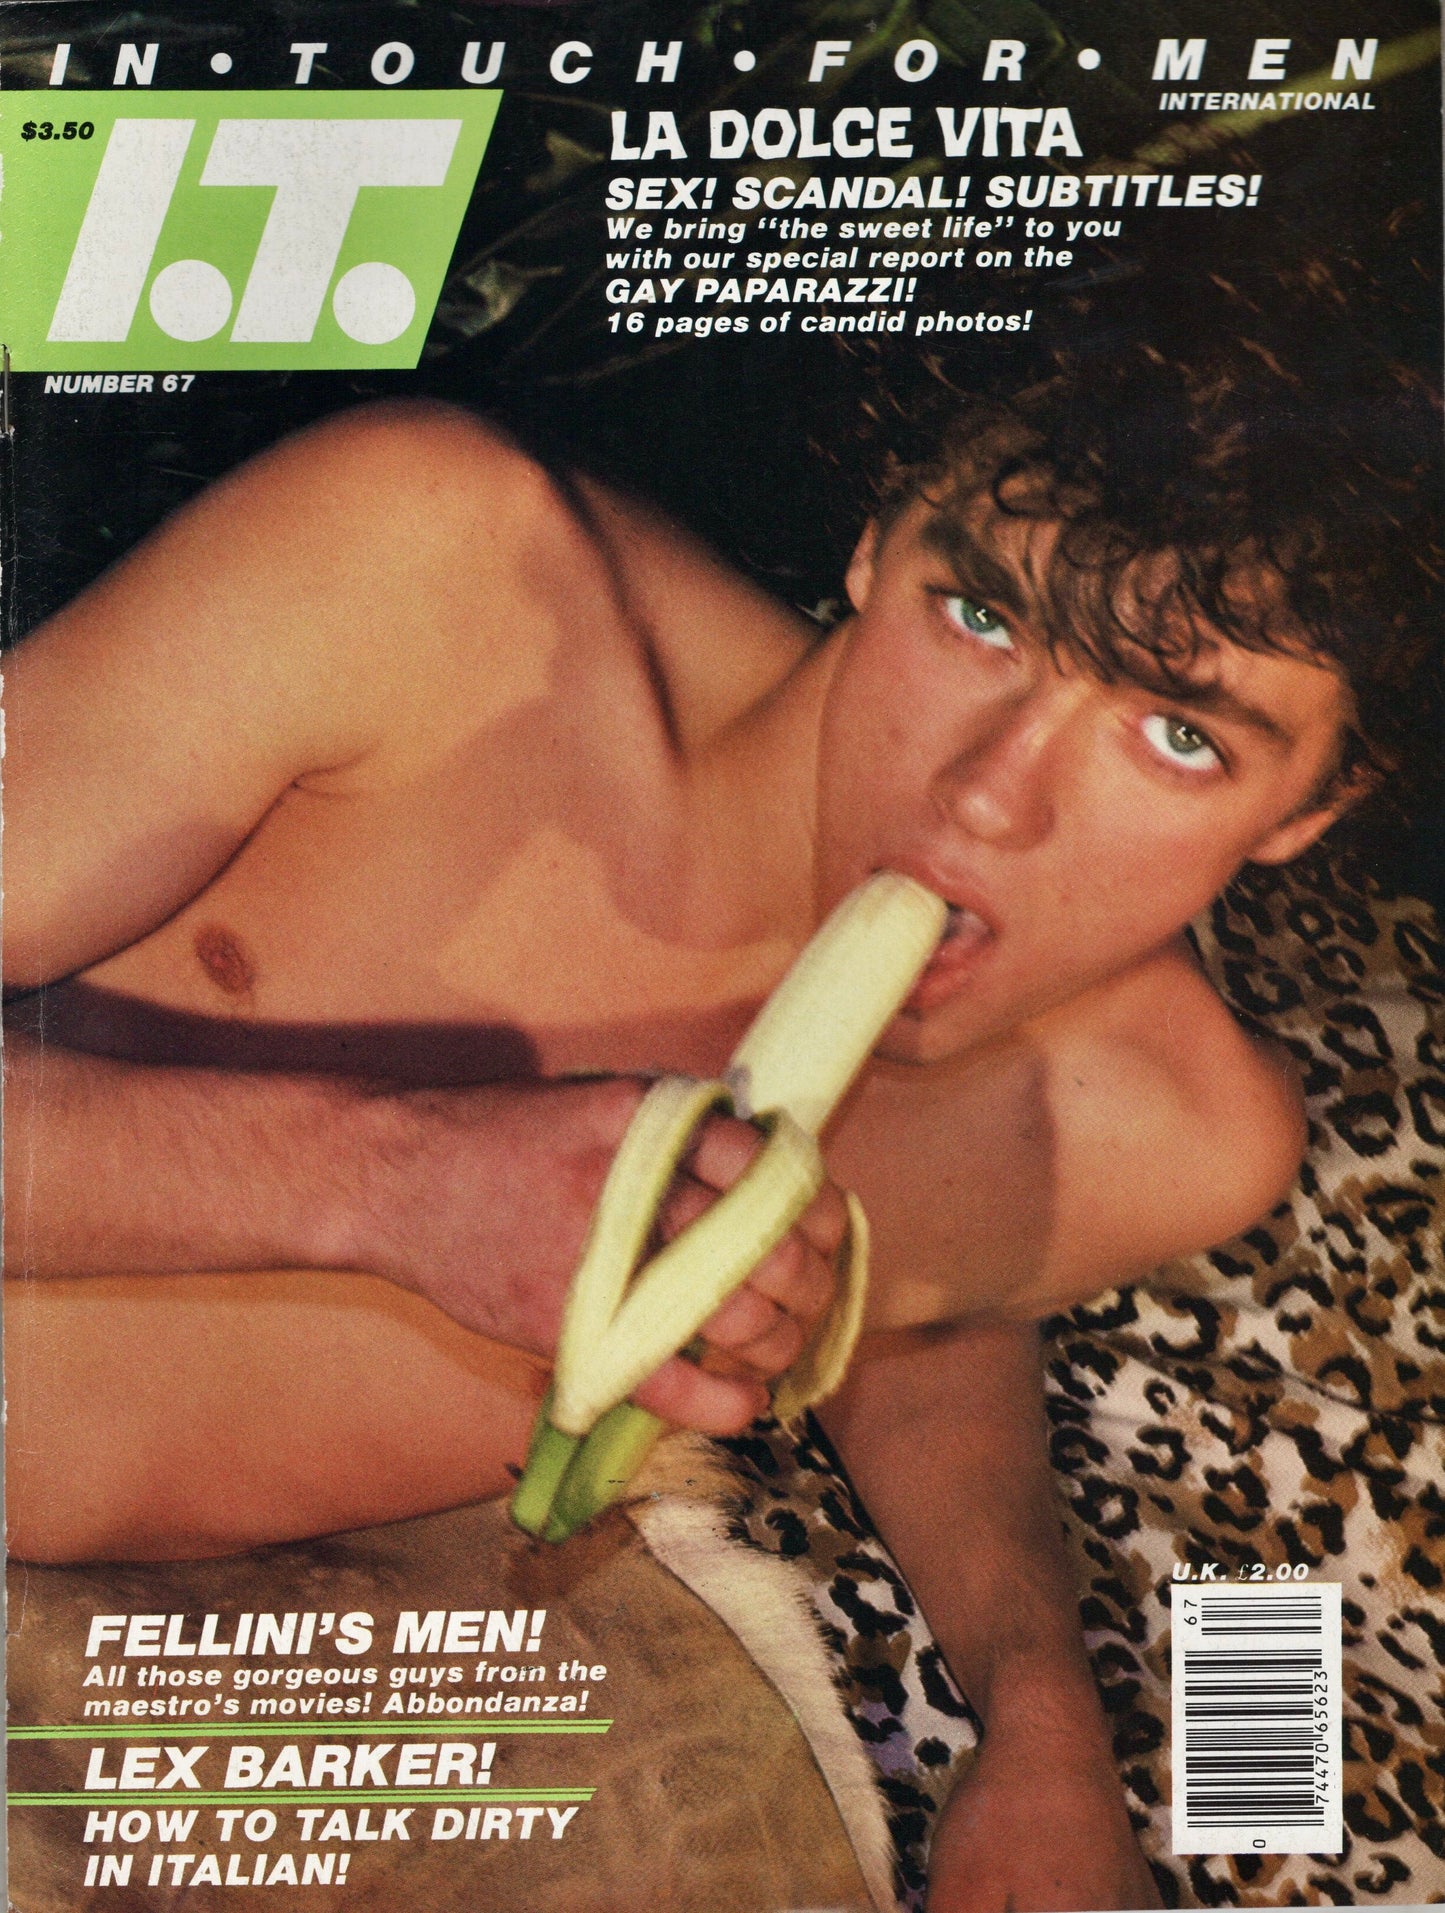 1982 May In Touch for Men Magazine Issue 67